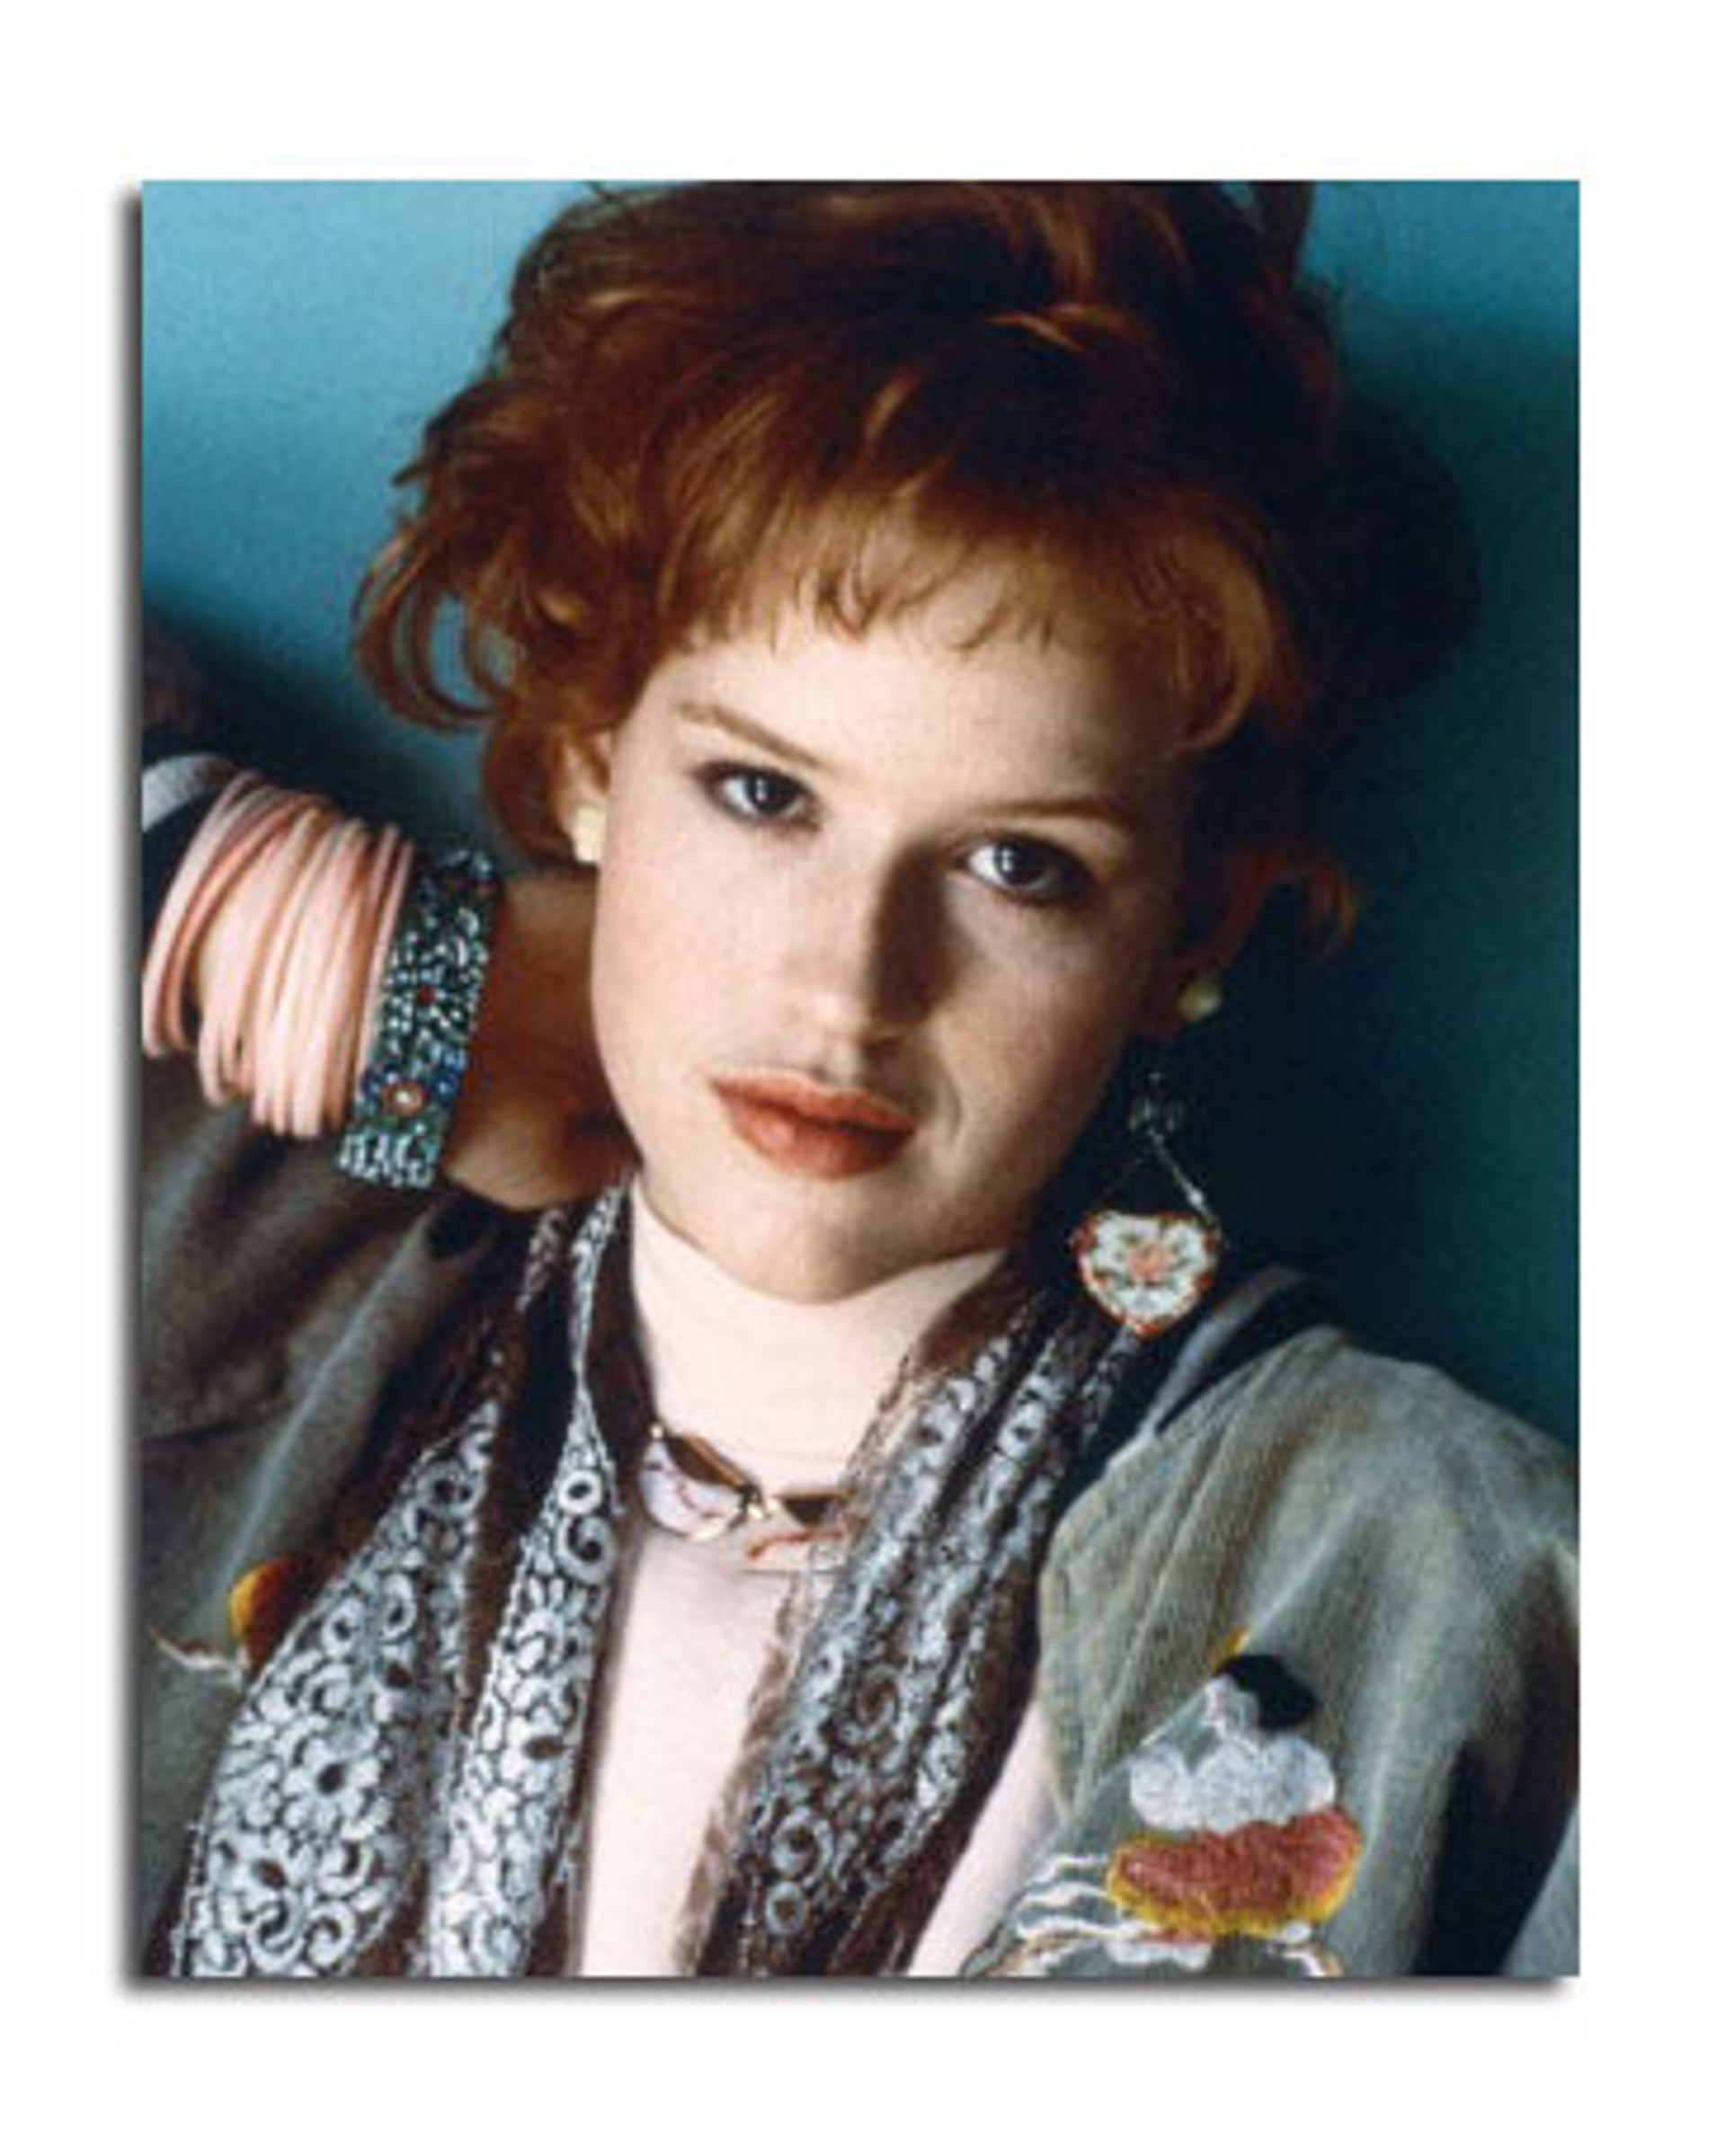 Ss150215 Movie Picture Of Molly Ringwald Buy Celebrity Photos And Posters At 